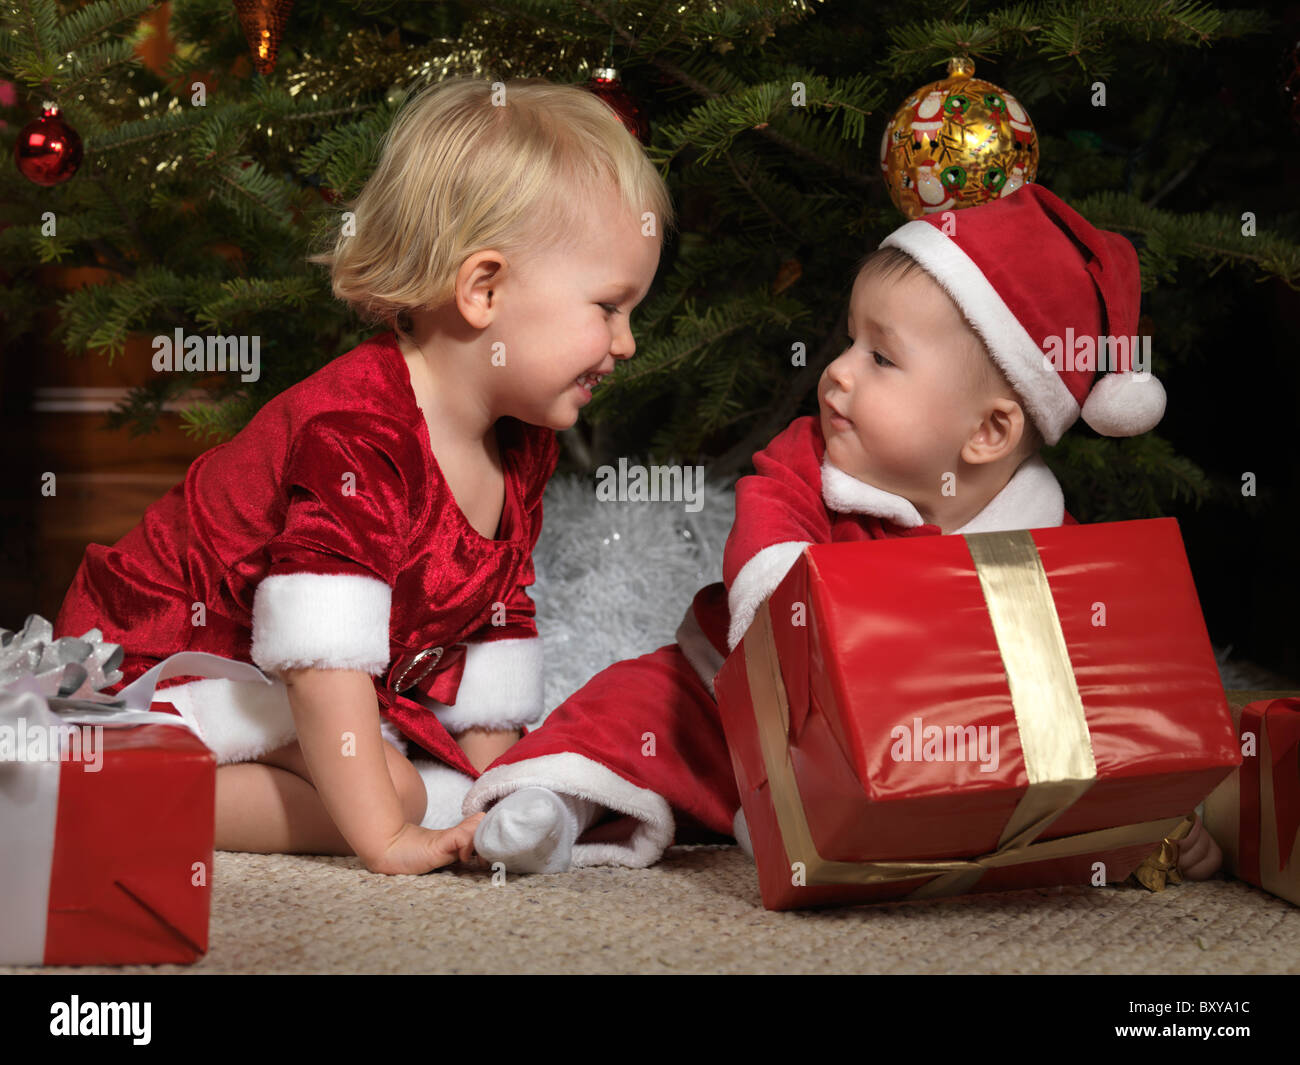 Eight month old baby boy doesn't want to share his Christmas gifts with a two year old girl Stock Photo